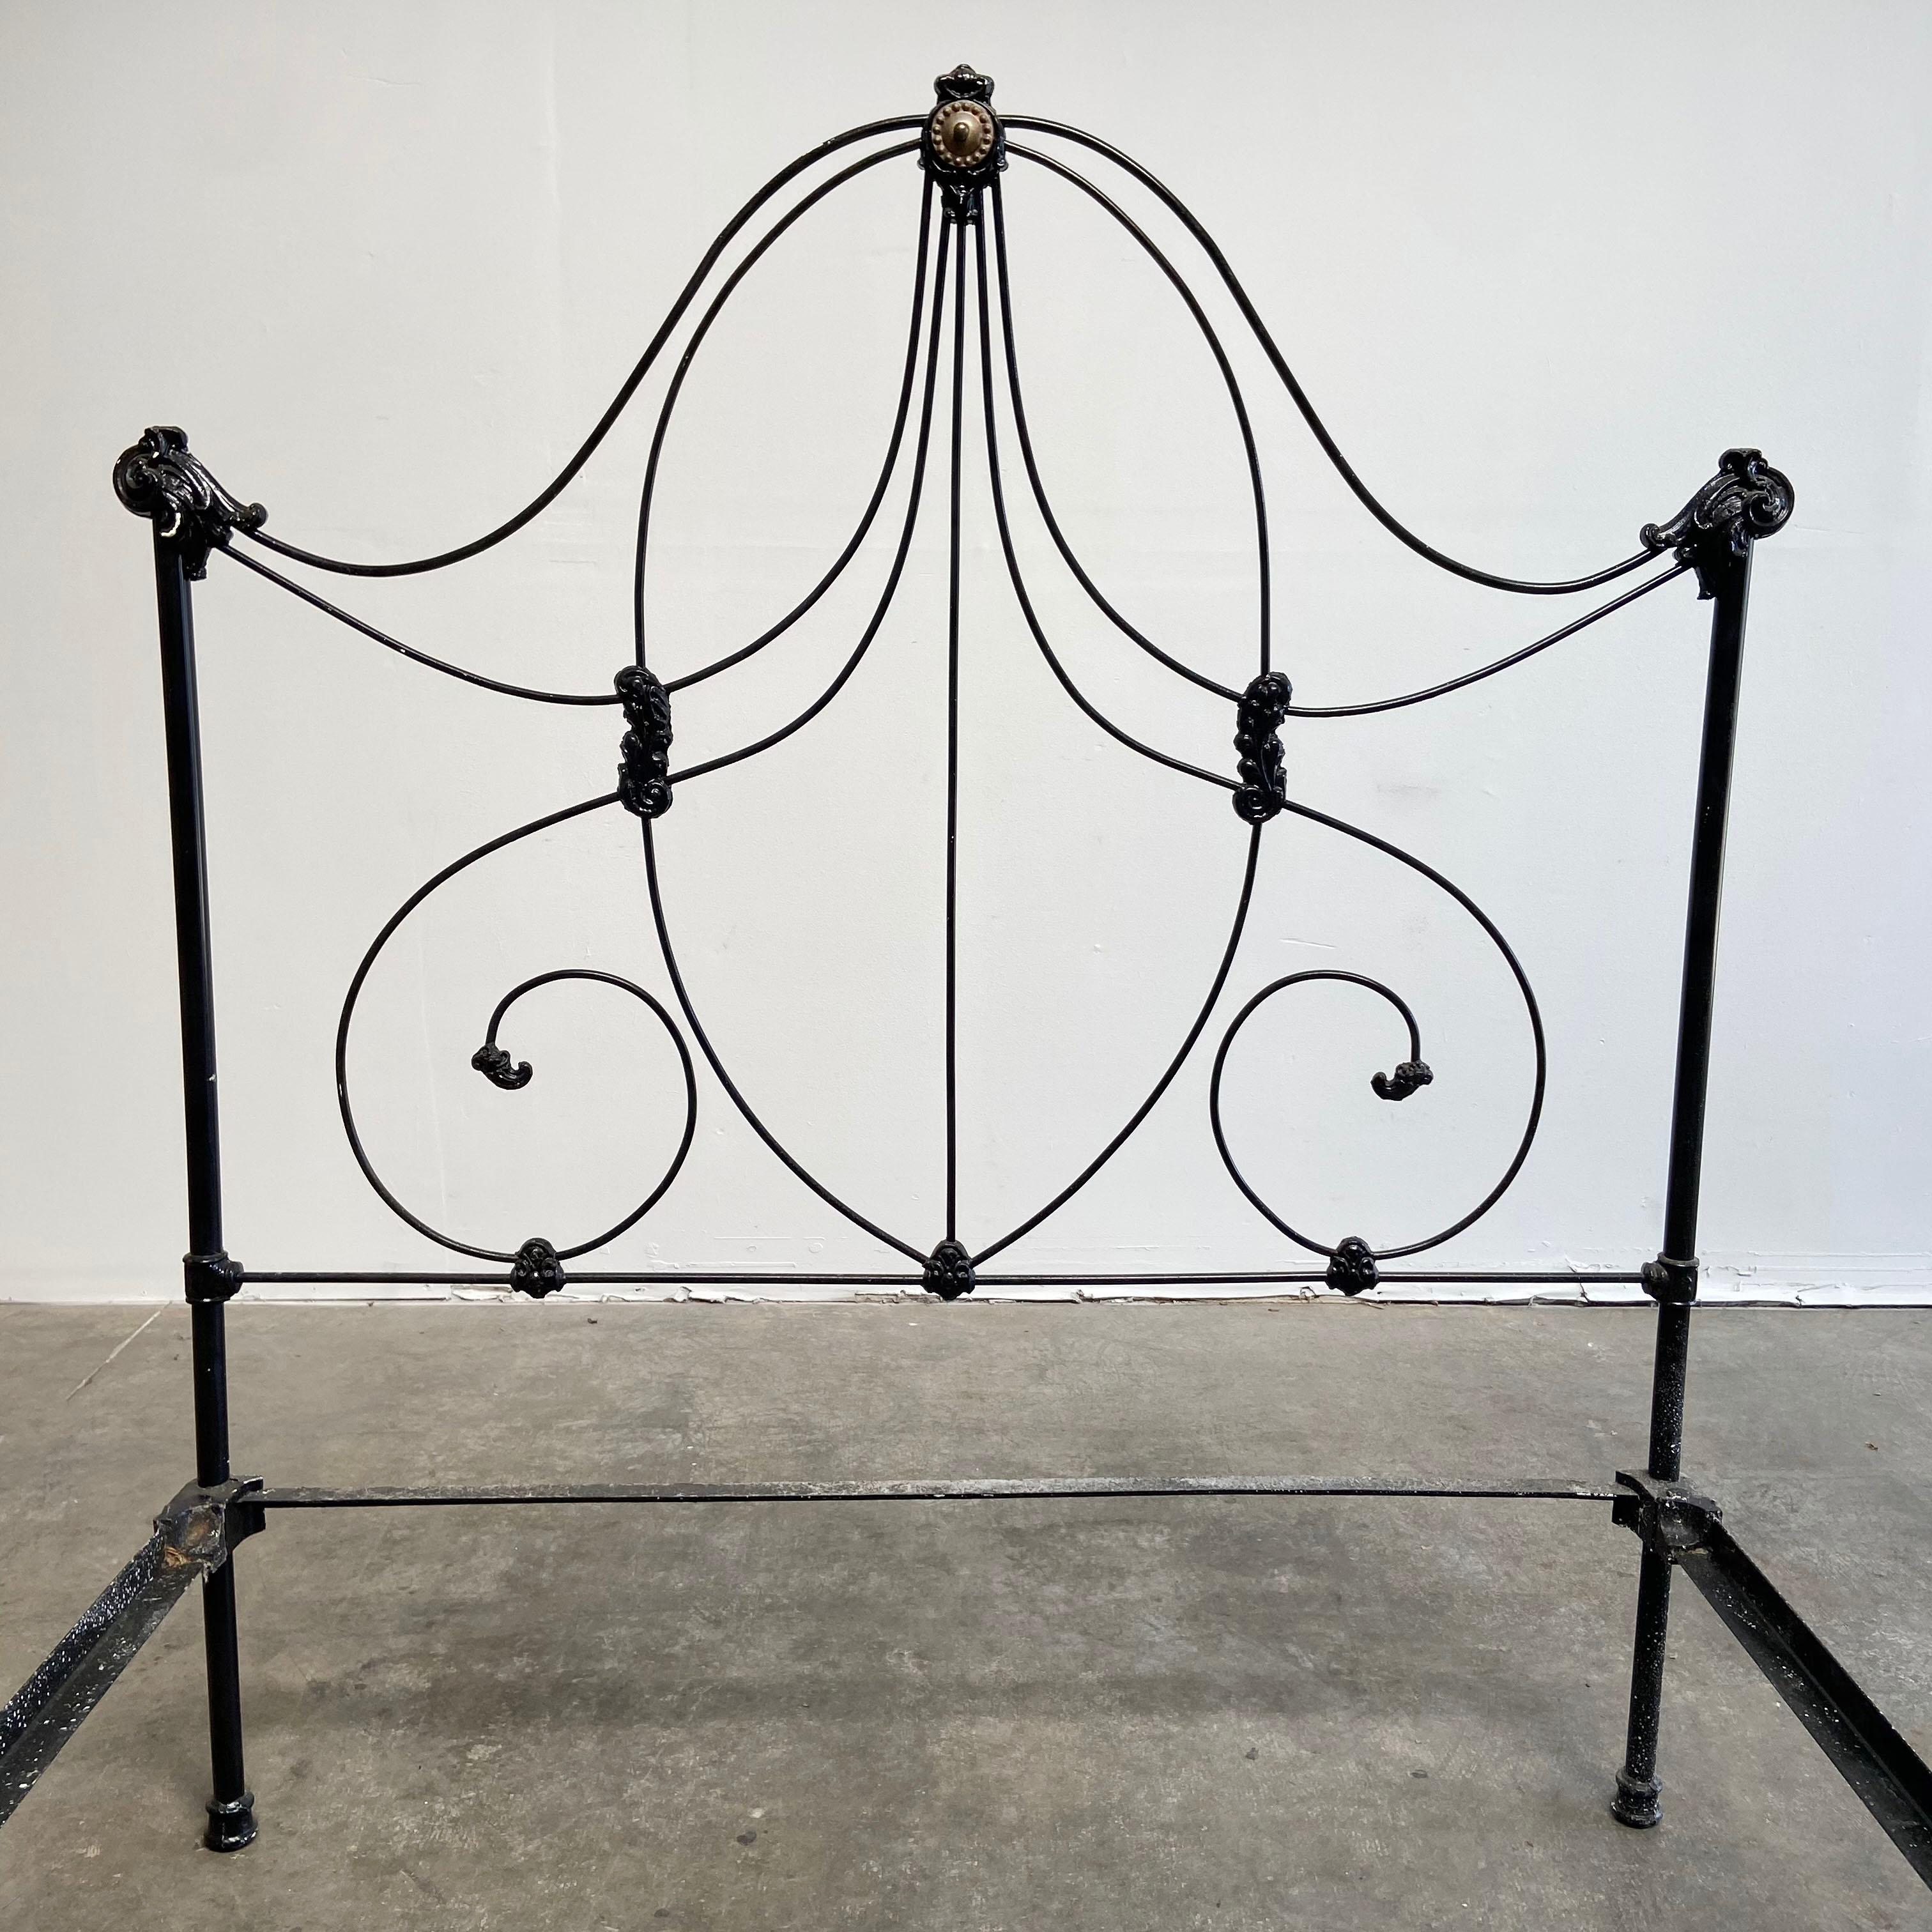 Beautiful antique iron bed with rails ready to set up and use. Solid black painted iron with brass details.
This is ready for a double or full size US Mattress. The caster wheels are removable if needed. They are original. The bed is super solid